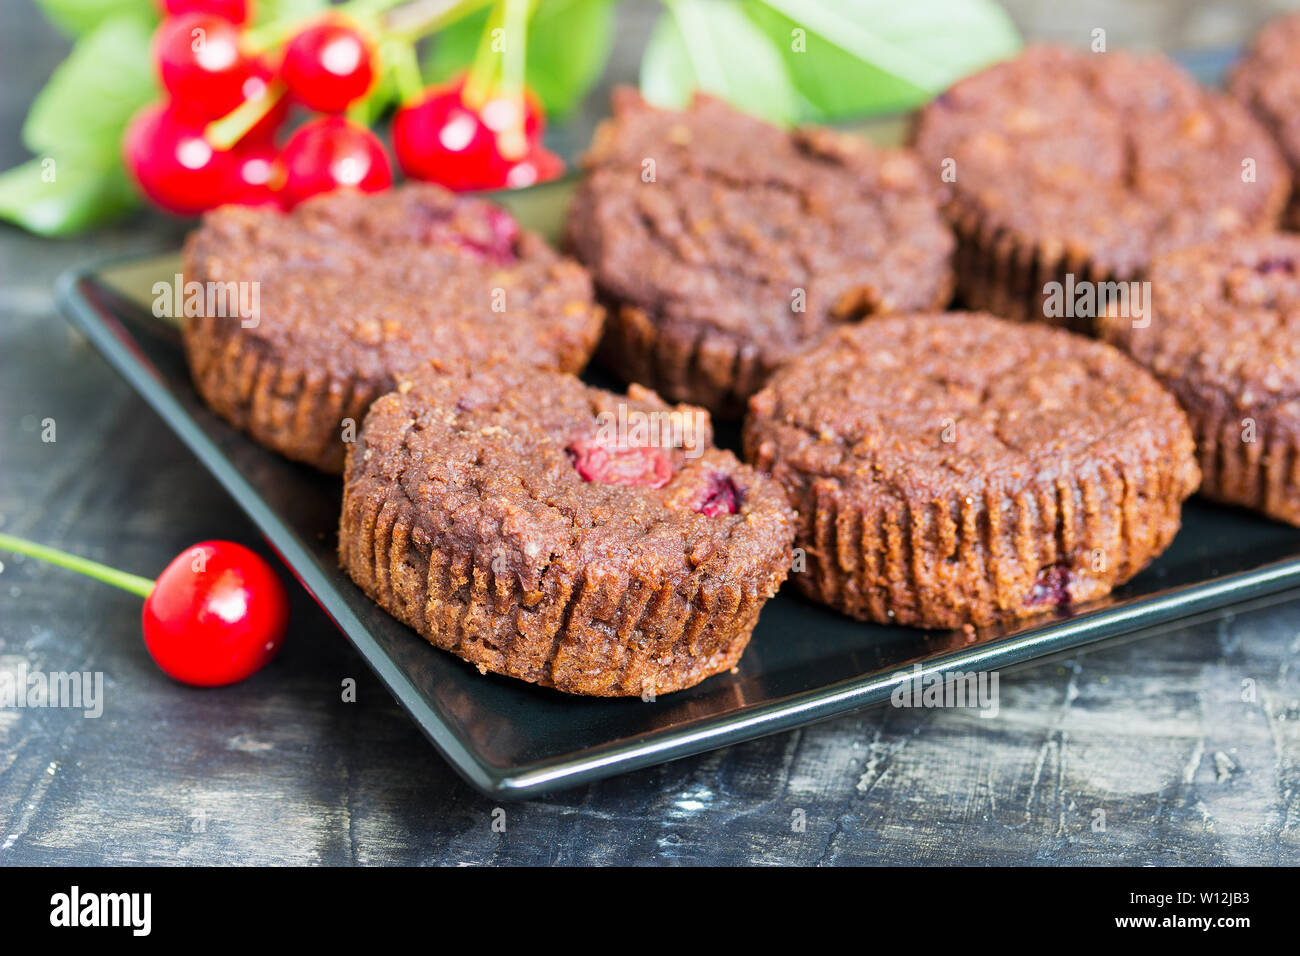 Chocolate muffin with fresh cherries on a plate Stock Photo